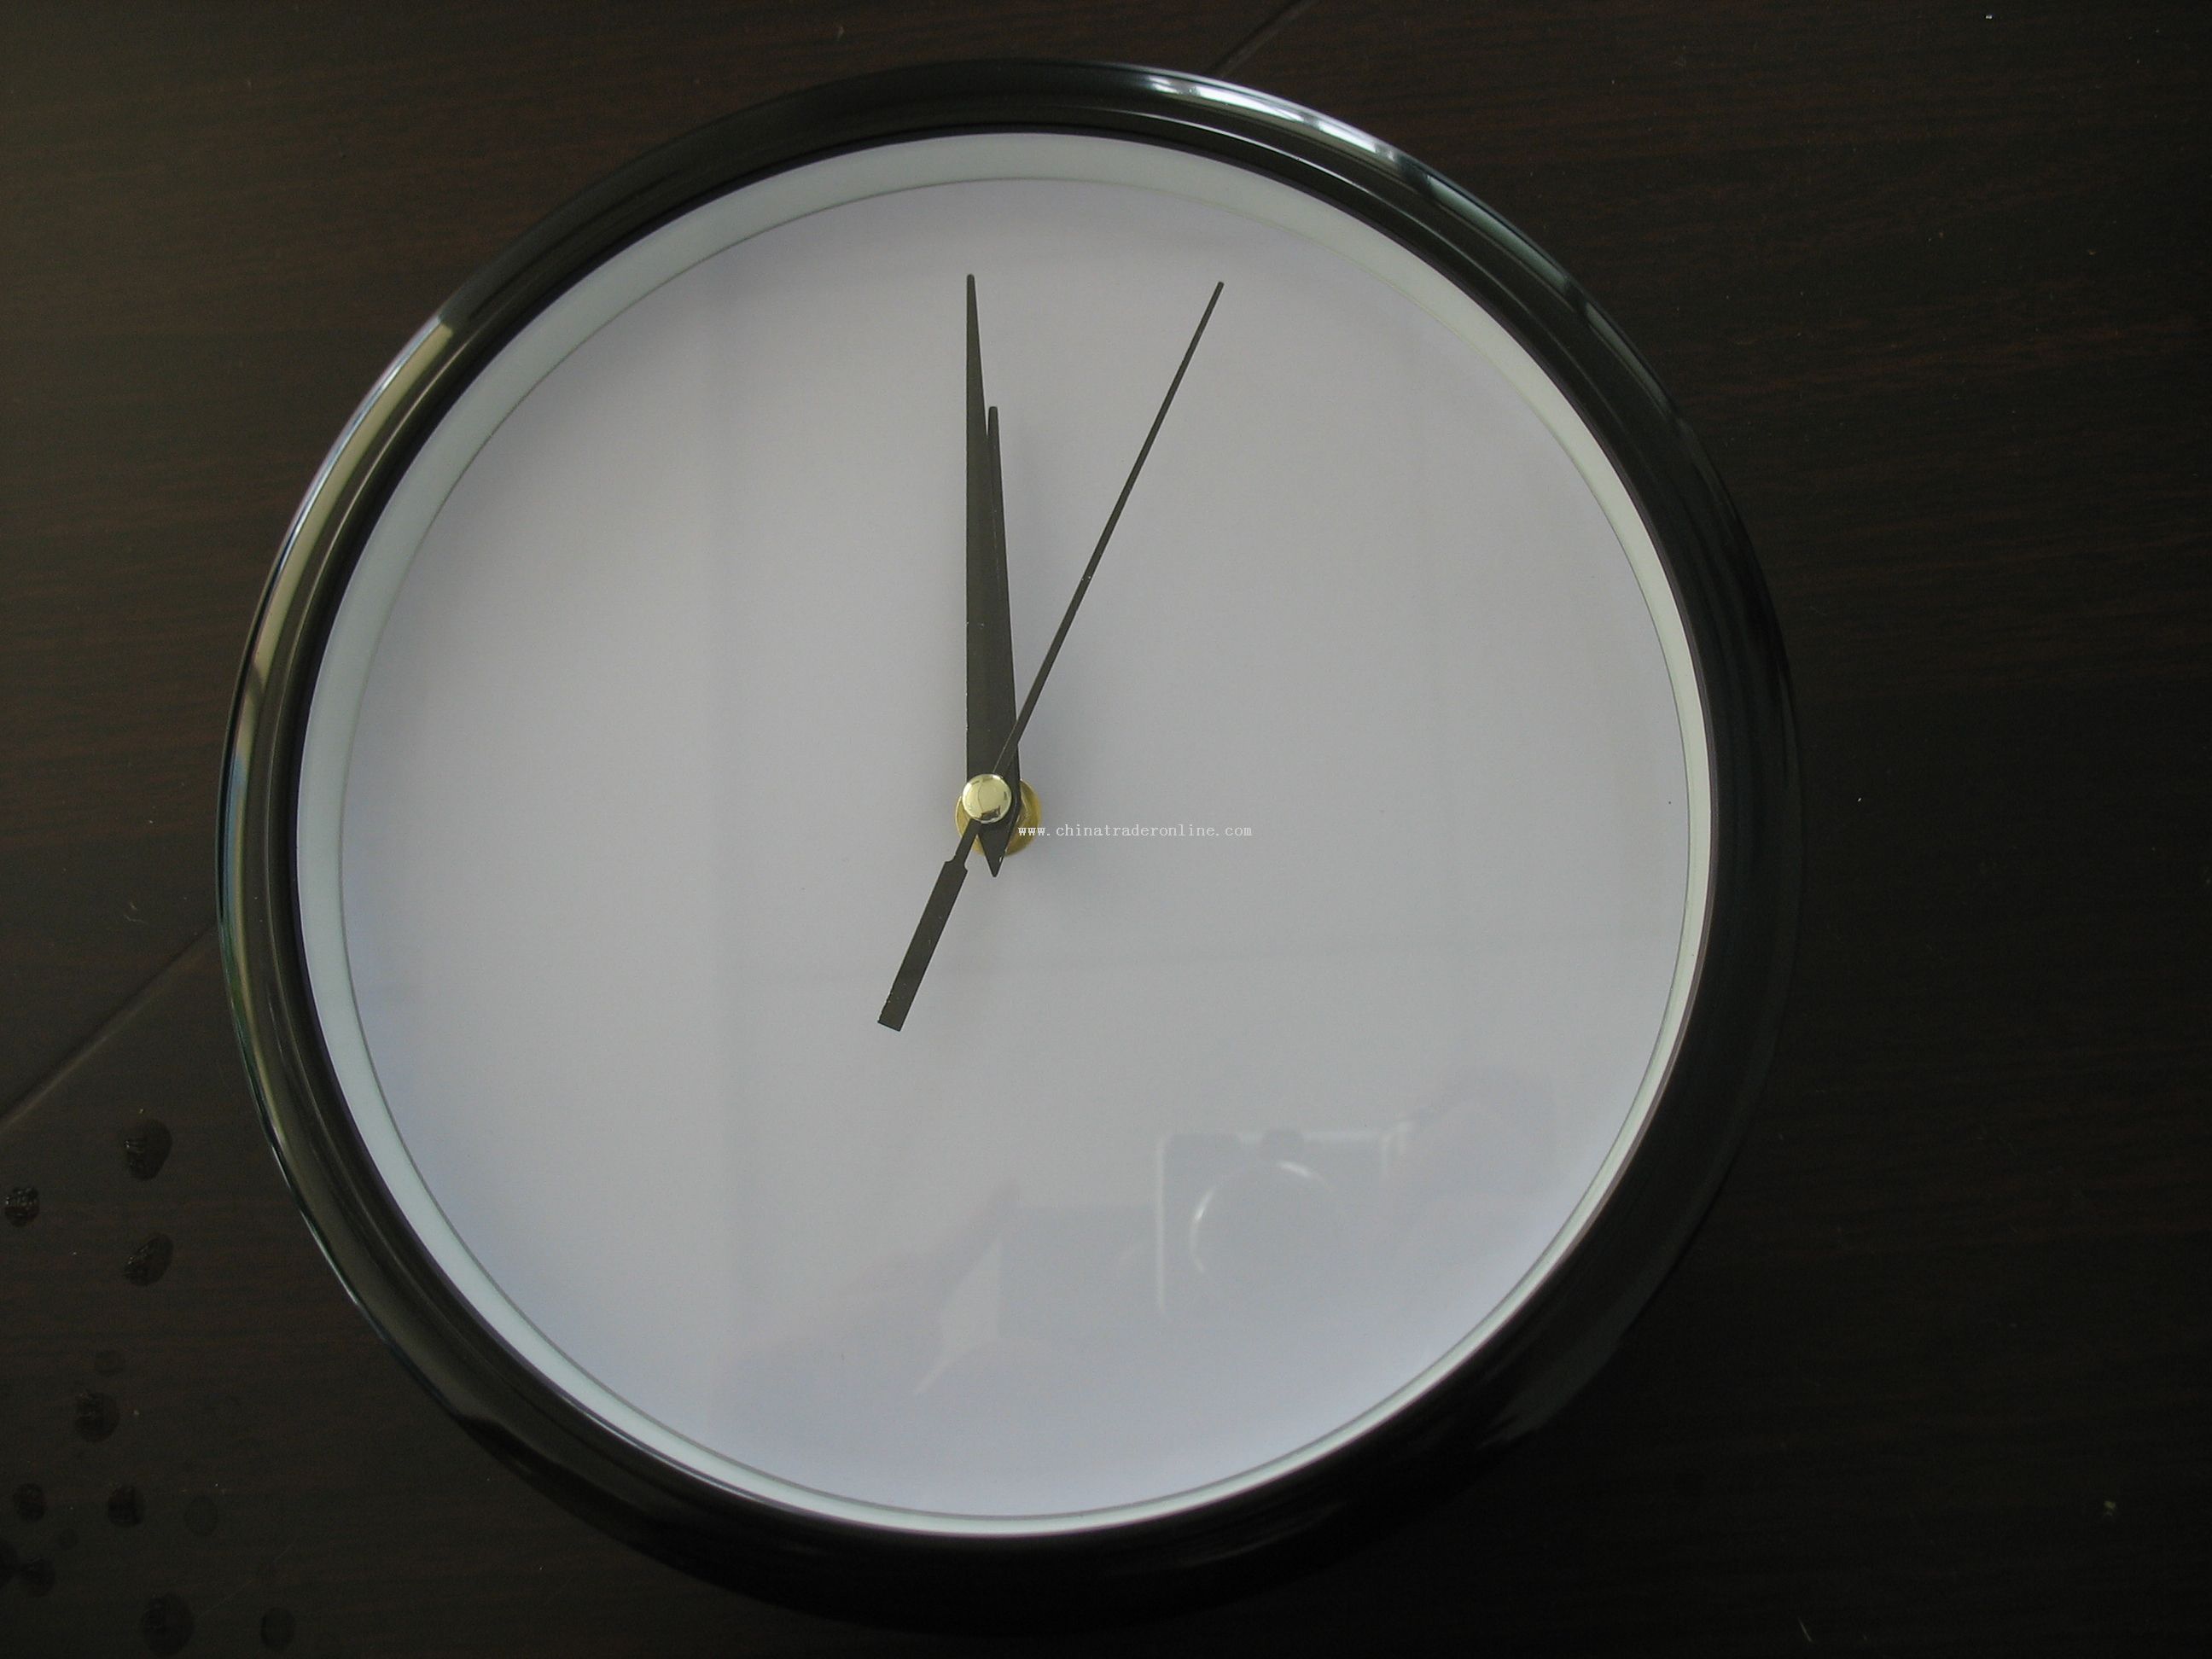 The cheapest Plastic Clock from China